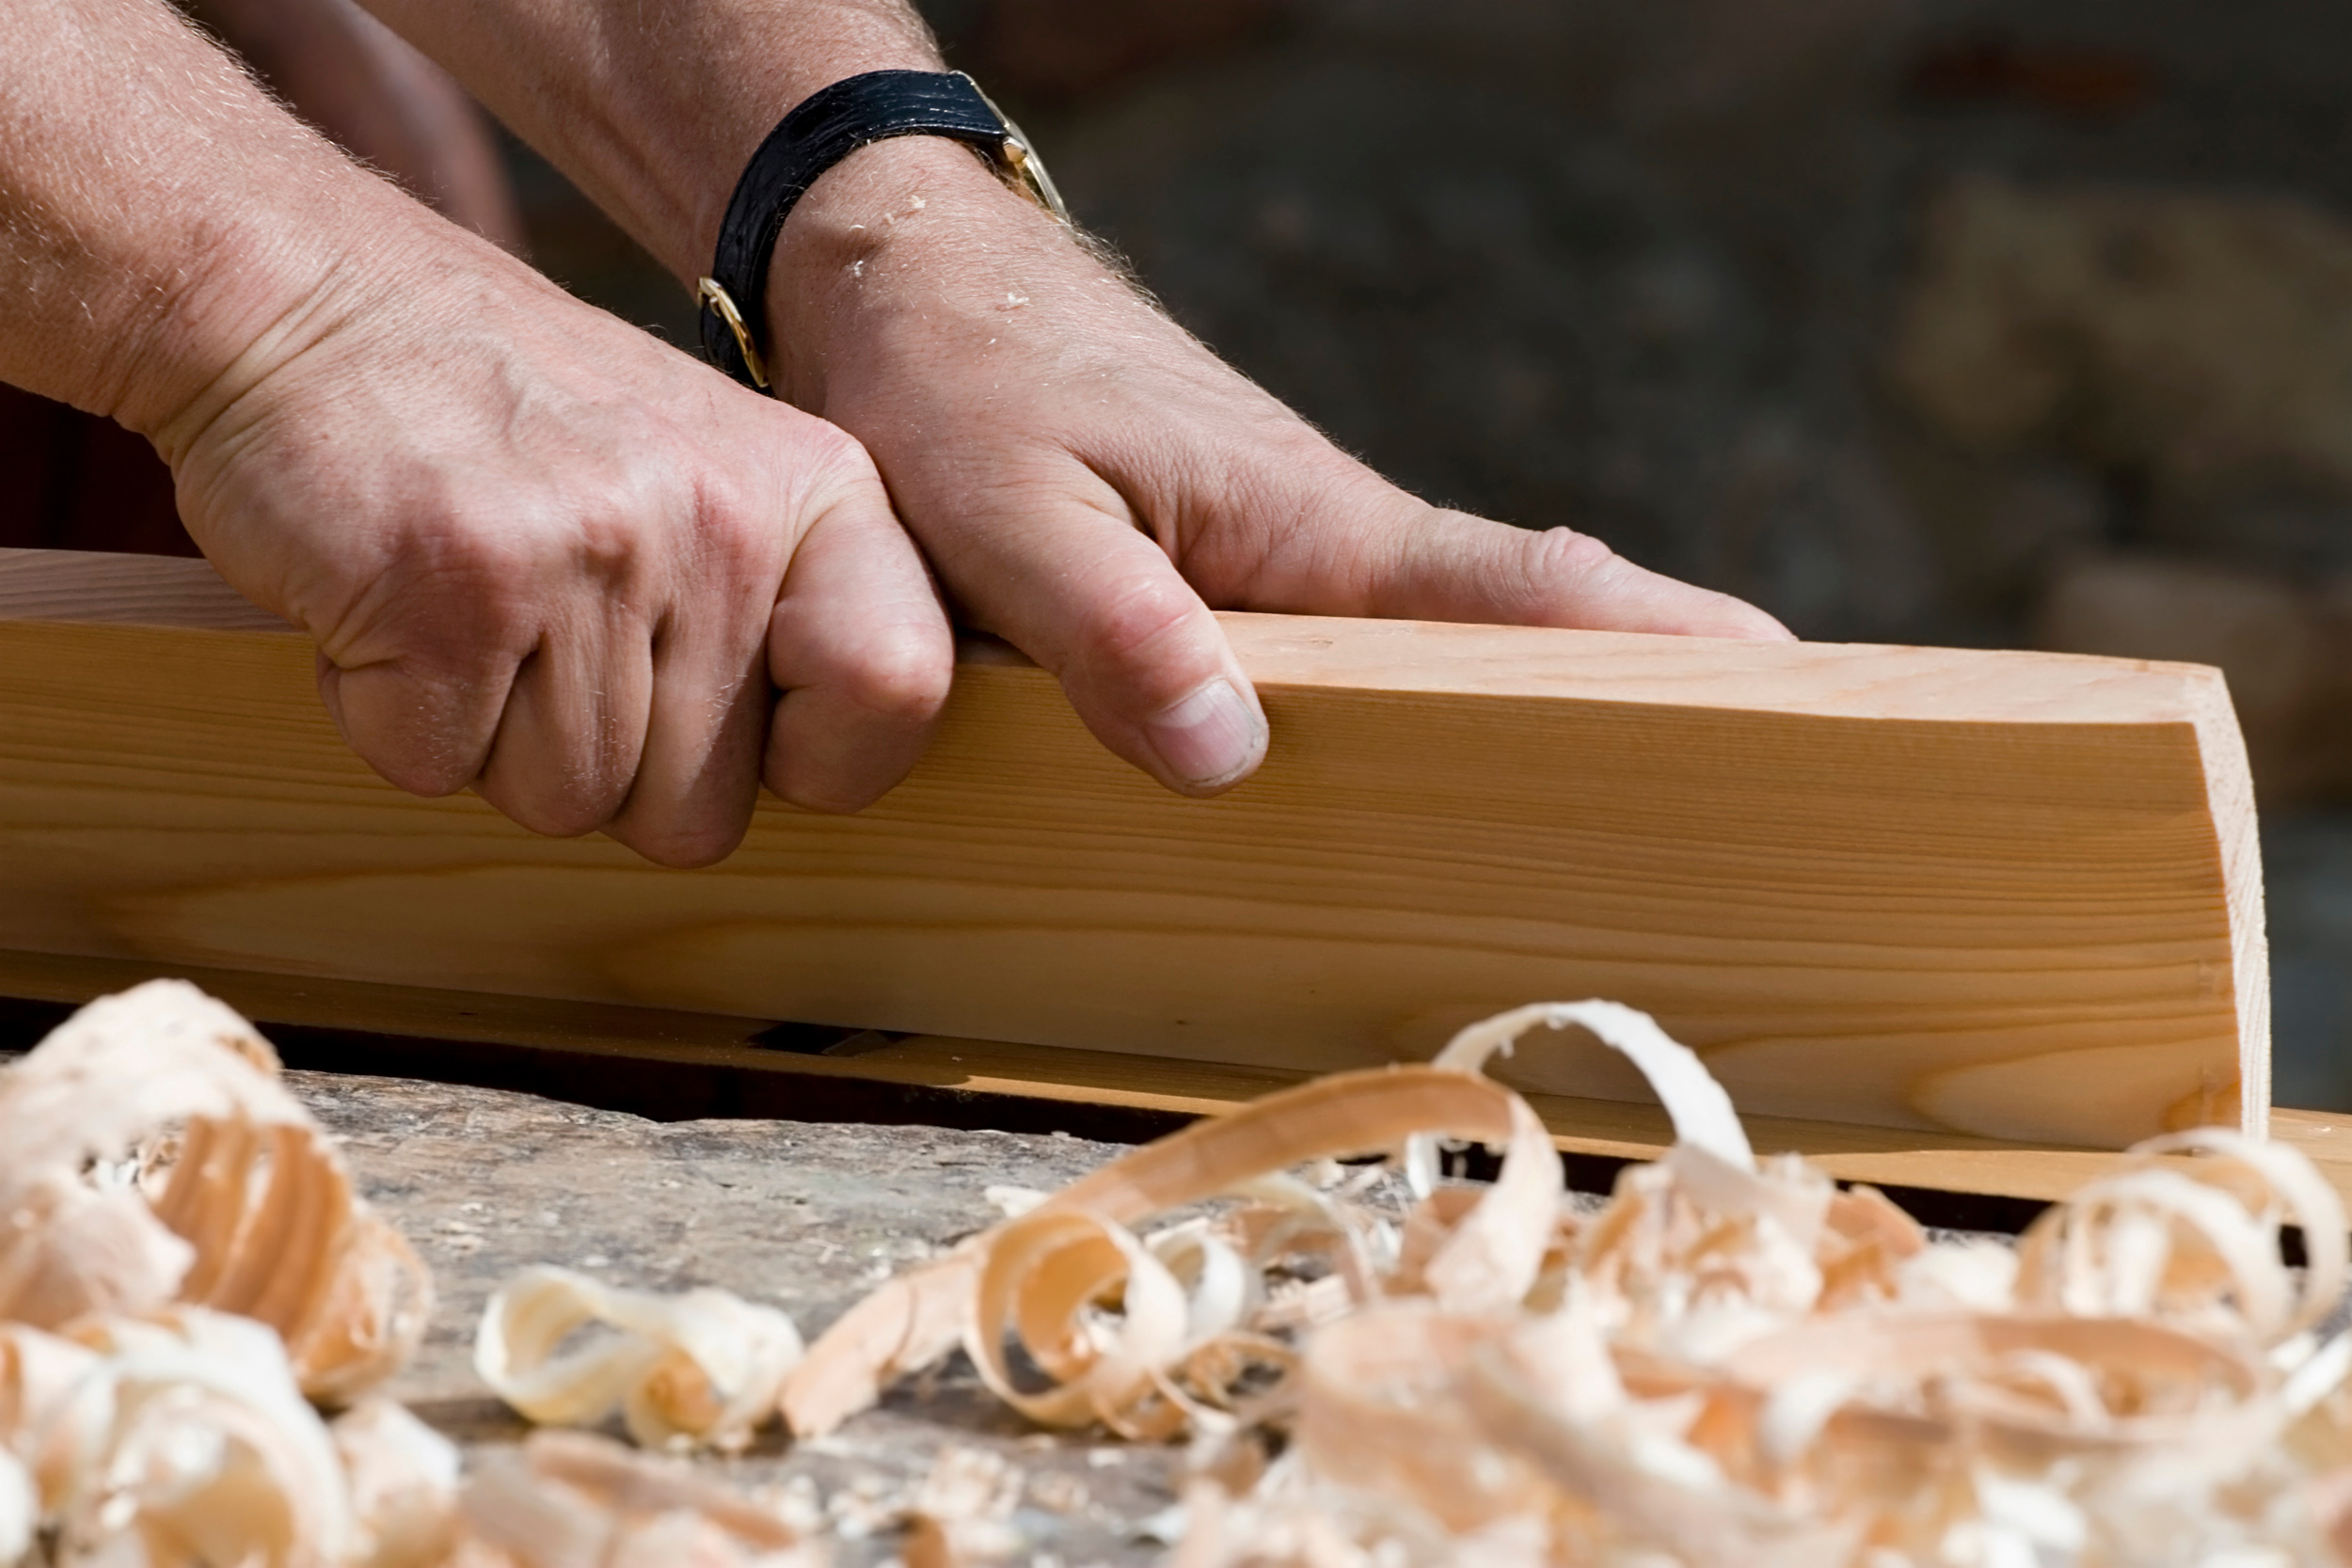 Close up of woodworking hands and wood shavings